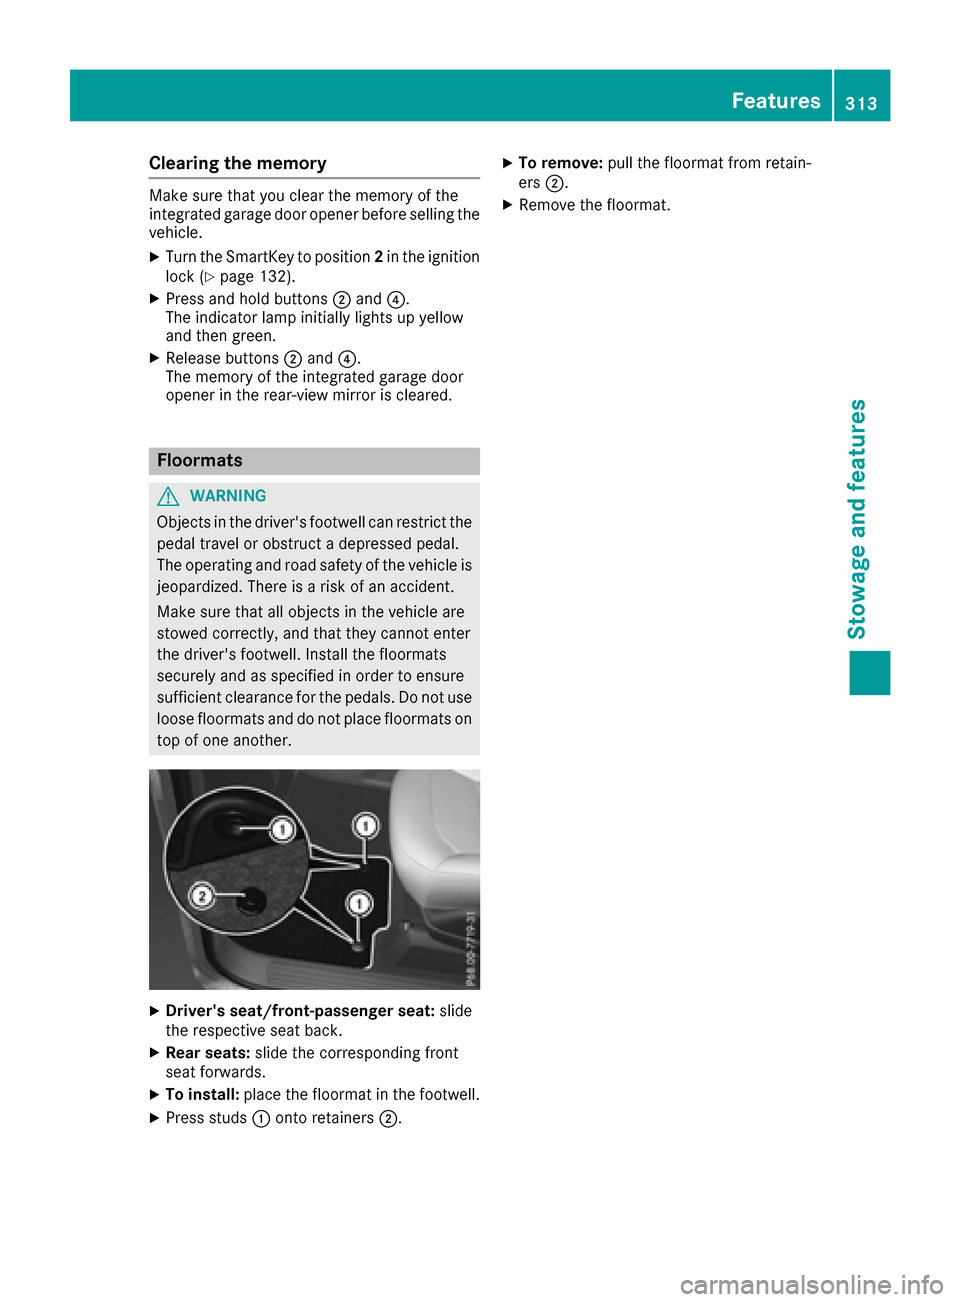 MERCEDES-BENZ GLE SUV 2017 W166 Owners Manual Clearing the memory
Make sure that you clear the memory of the
integrated garage door opener before selling the
vehicle.
XTurn the SmartKey to position2in the ignition
lock (Ypage 132).
XPress and hol